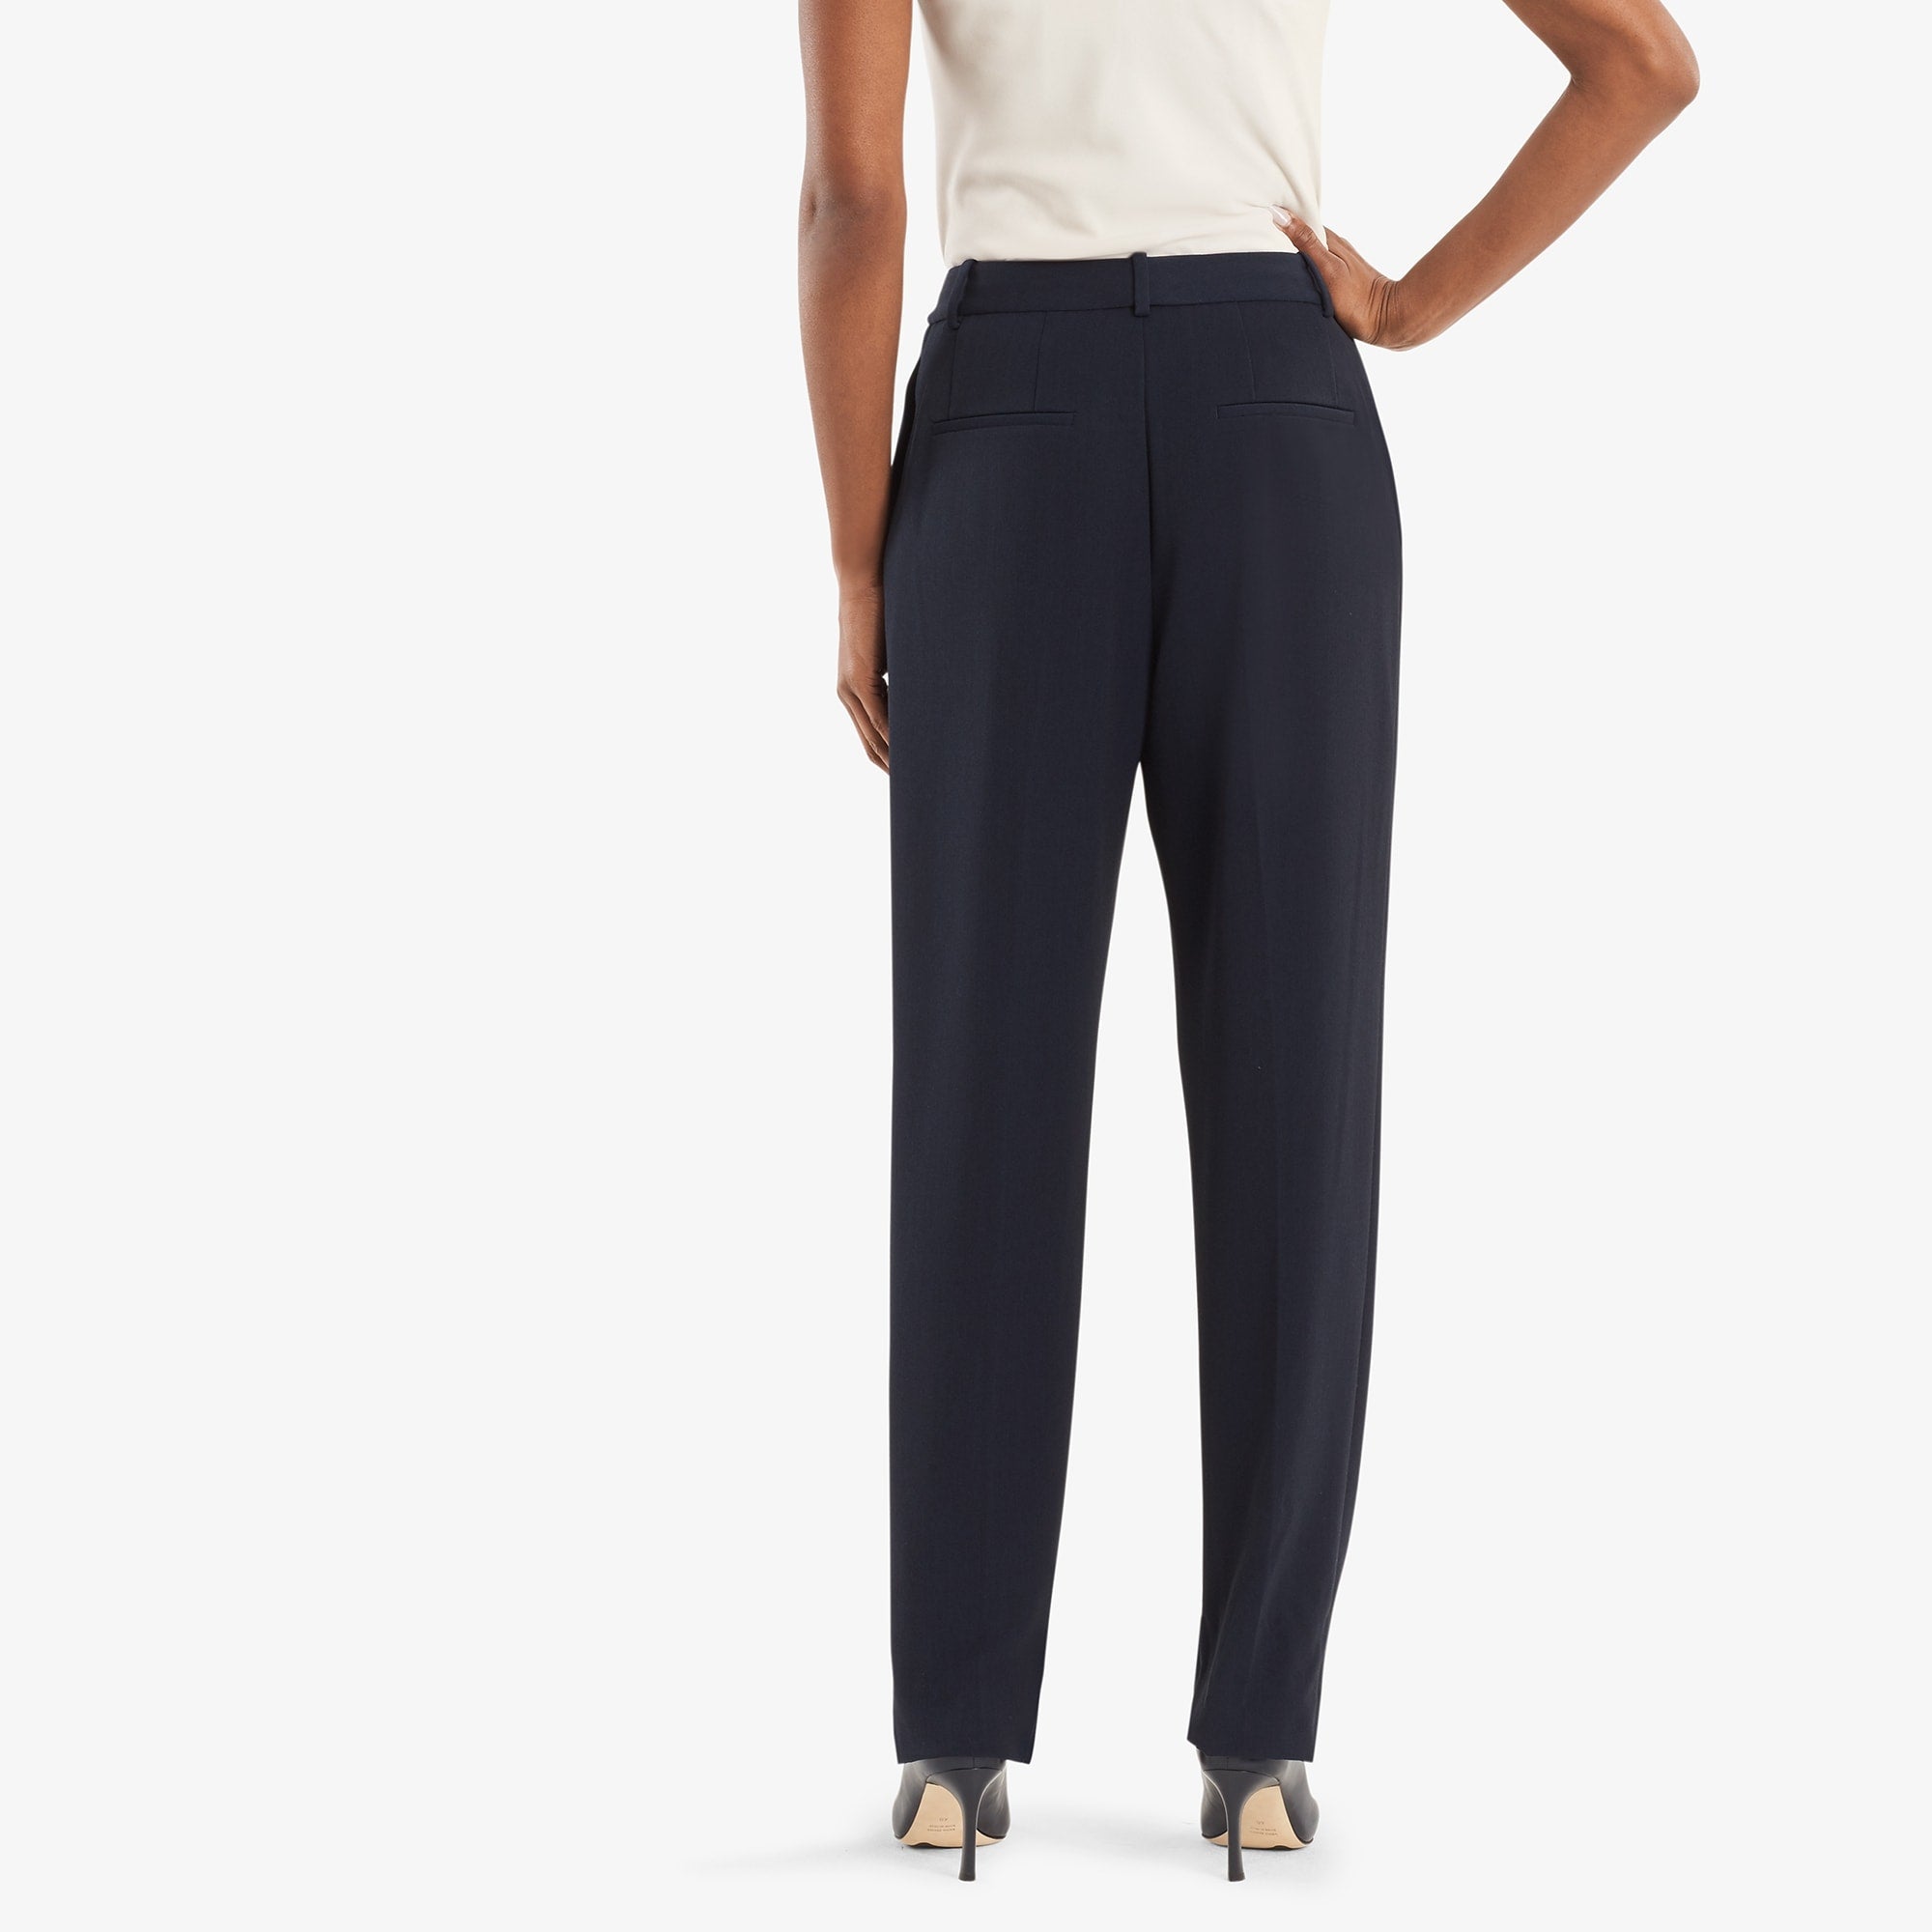 Back image of a woman standing wearing the Elliott trouser in navy.